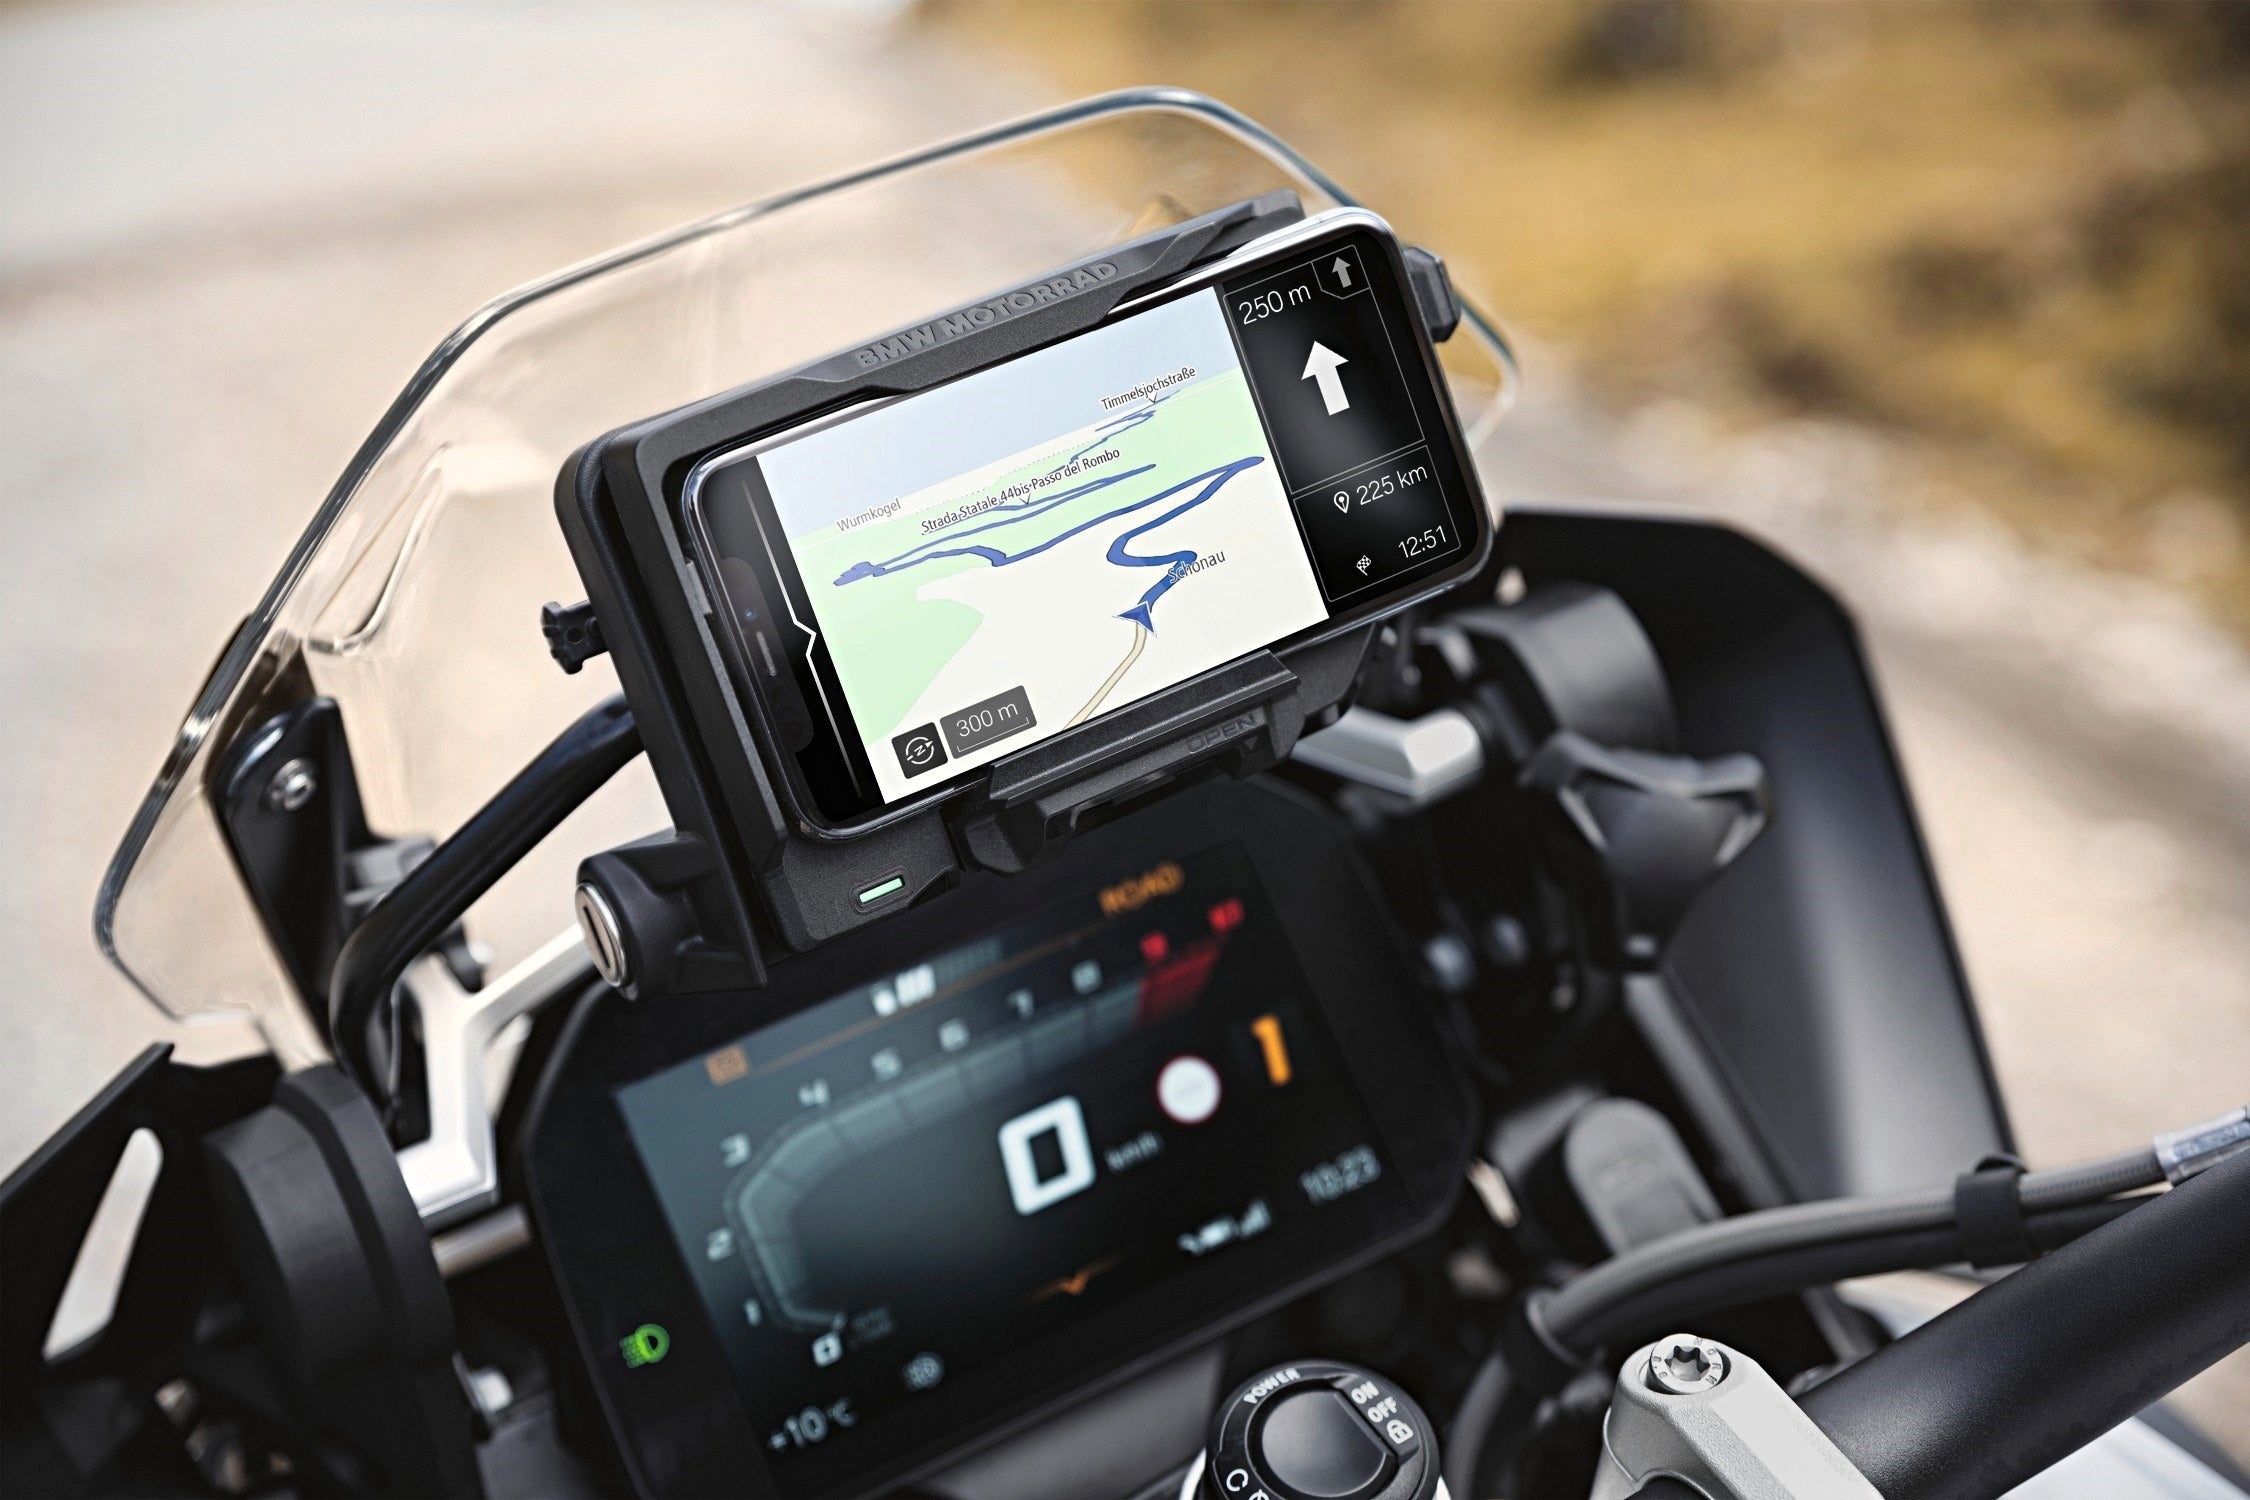 BMW&#039;s new bike-mount looks cool, but can it damage your phone? - Apple and BMW disagree whether iPhones can be attached to motorbikes